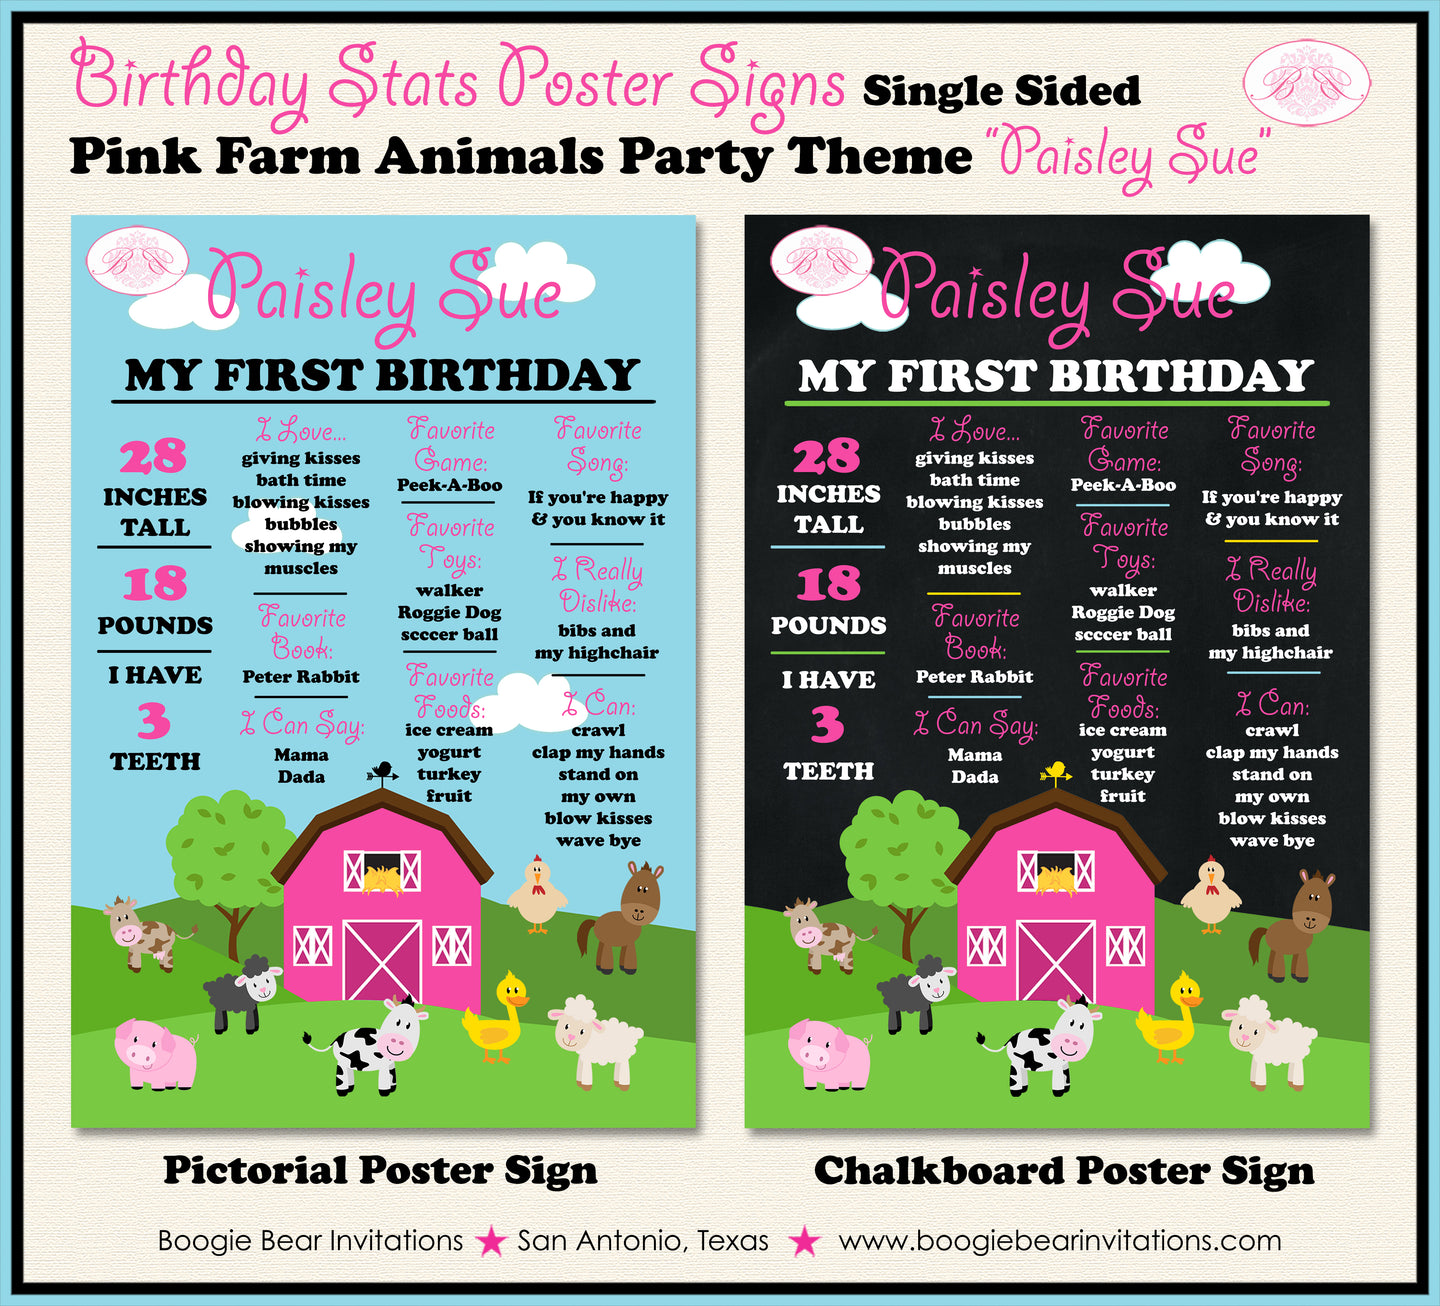 Farm Animals Birthday Party Sign Stats Poster Chalkboard Girl Pink Barn Country Petting Zoo Boogie Bear Invitations Paisley Sue Theme